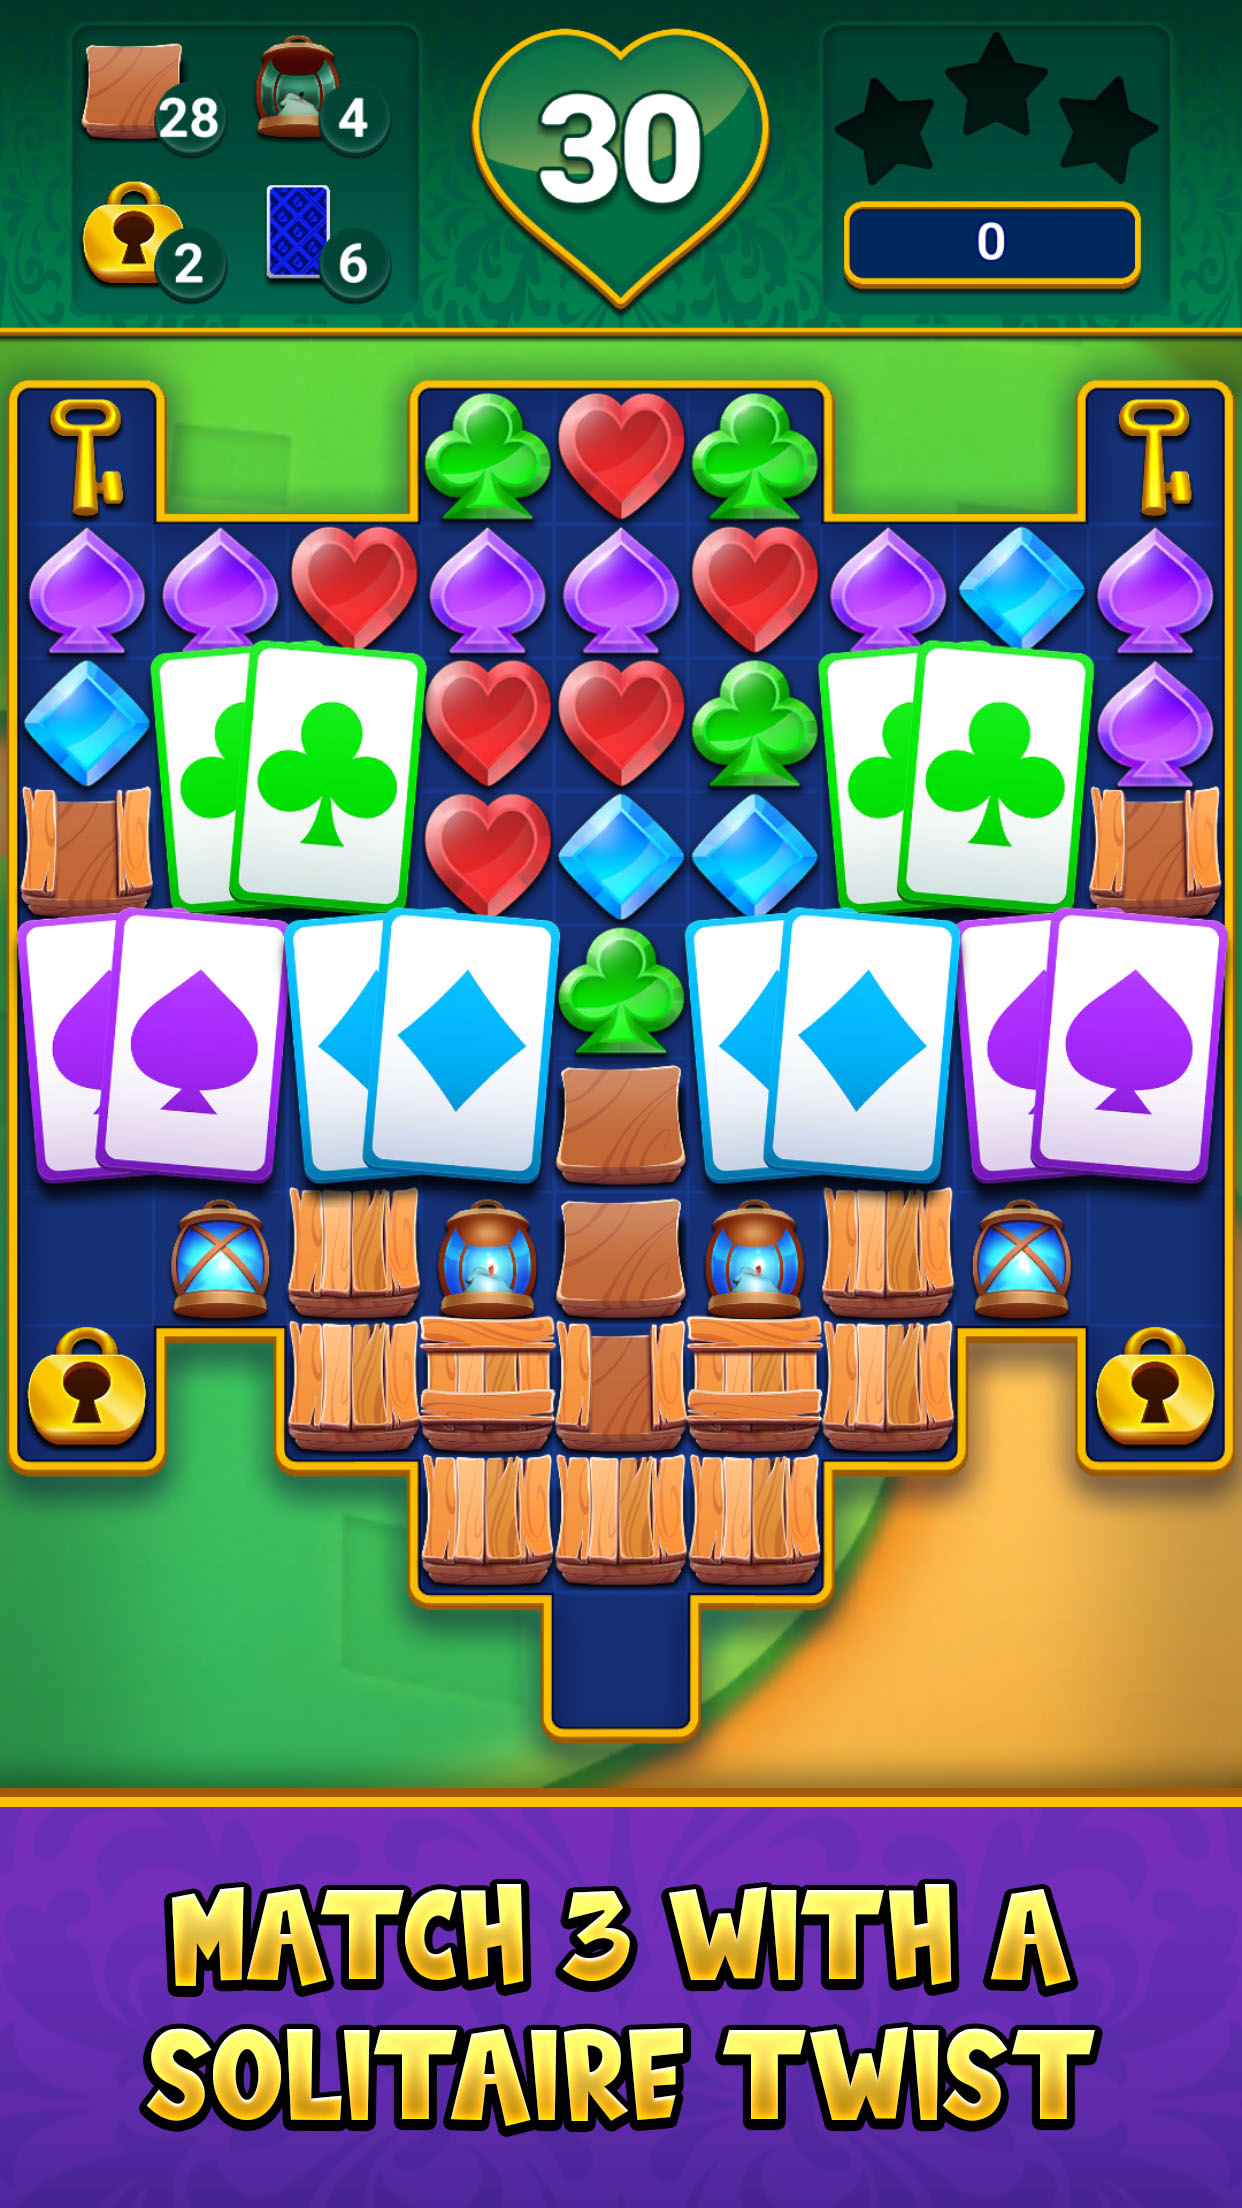 Play Solitaire Match 3 Online